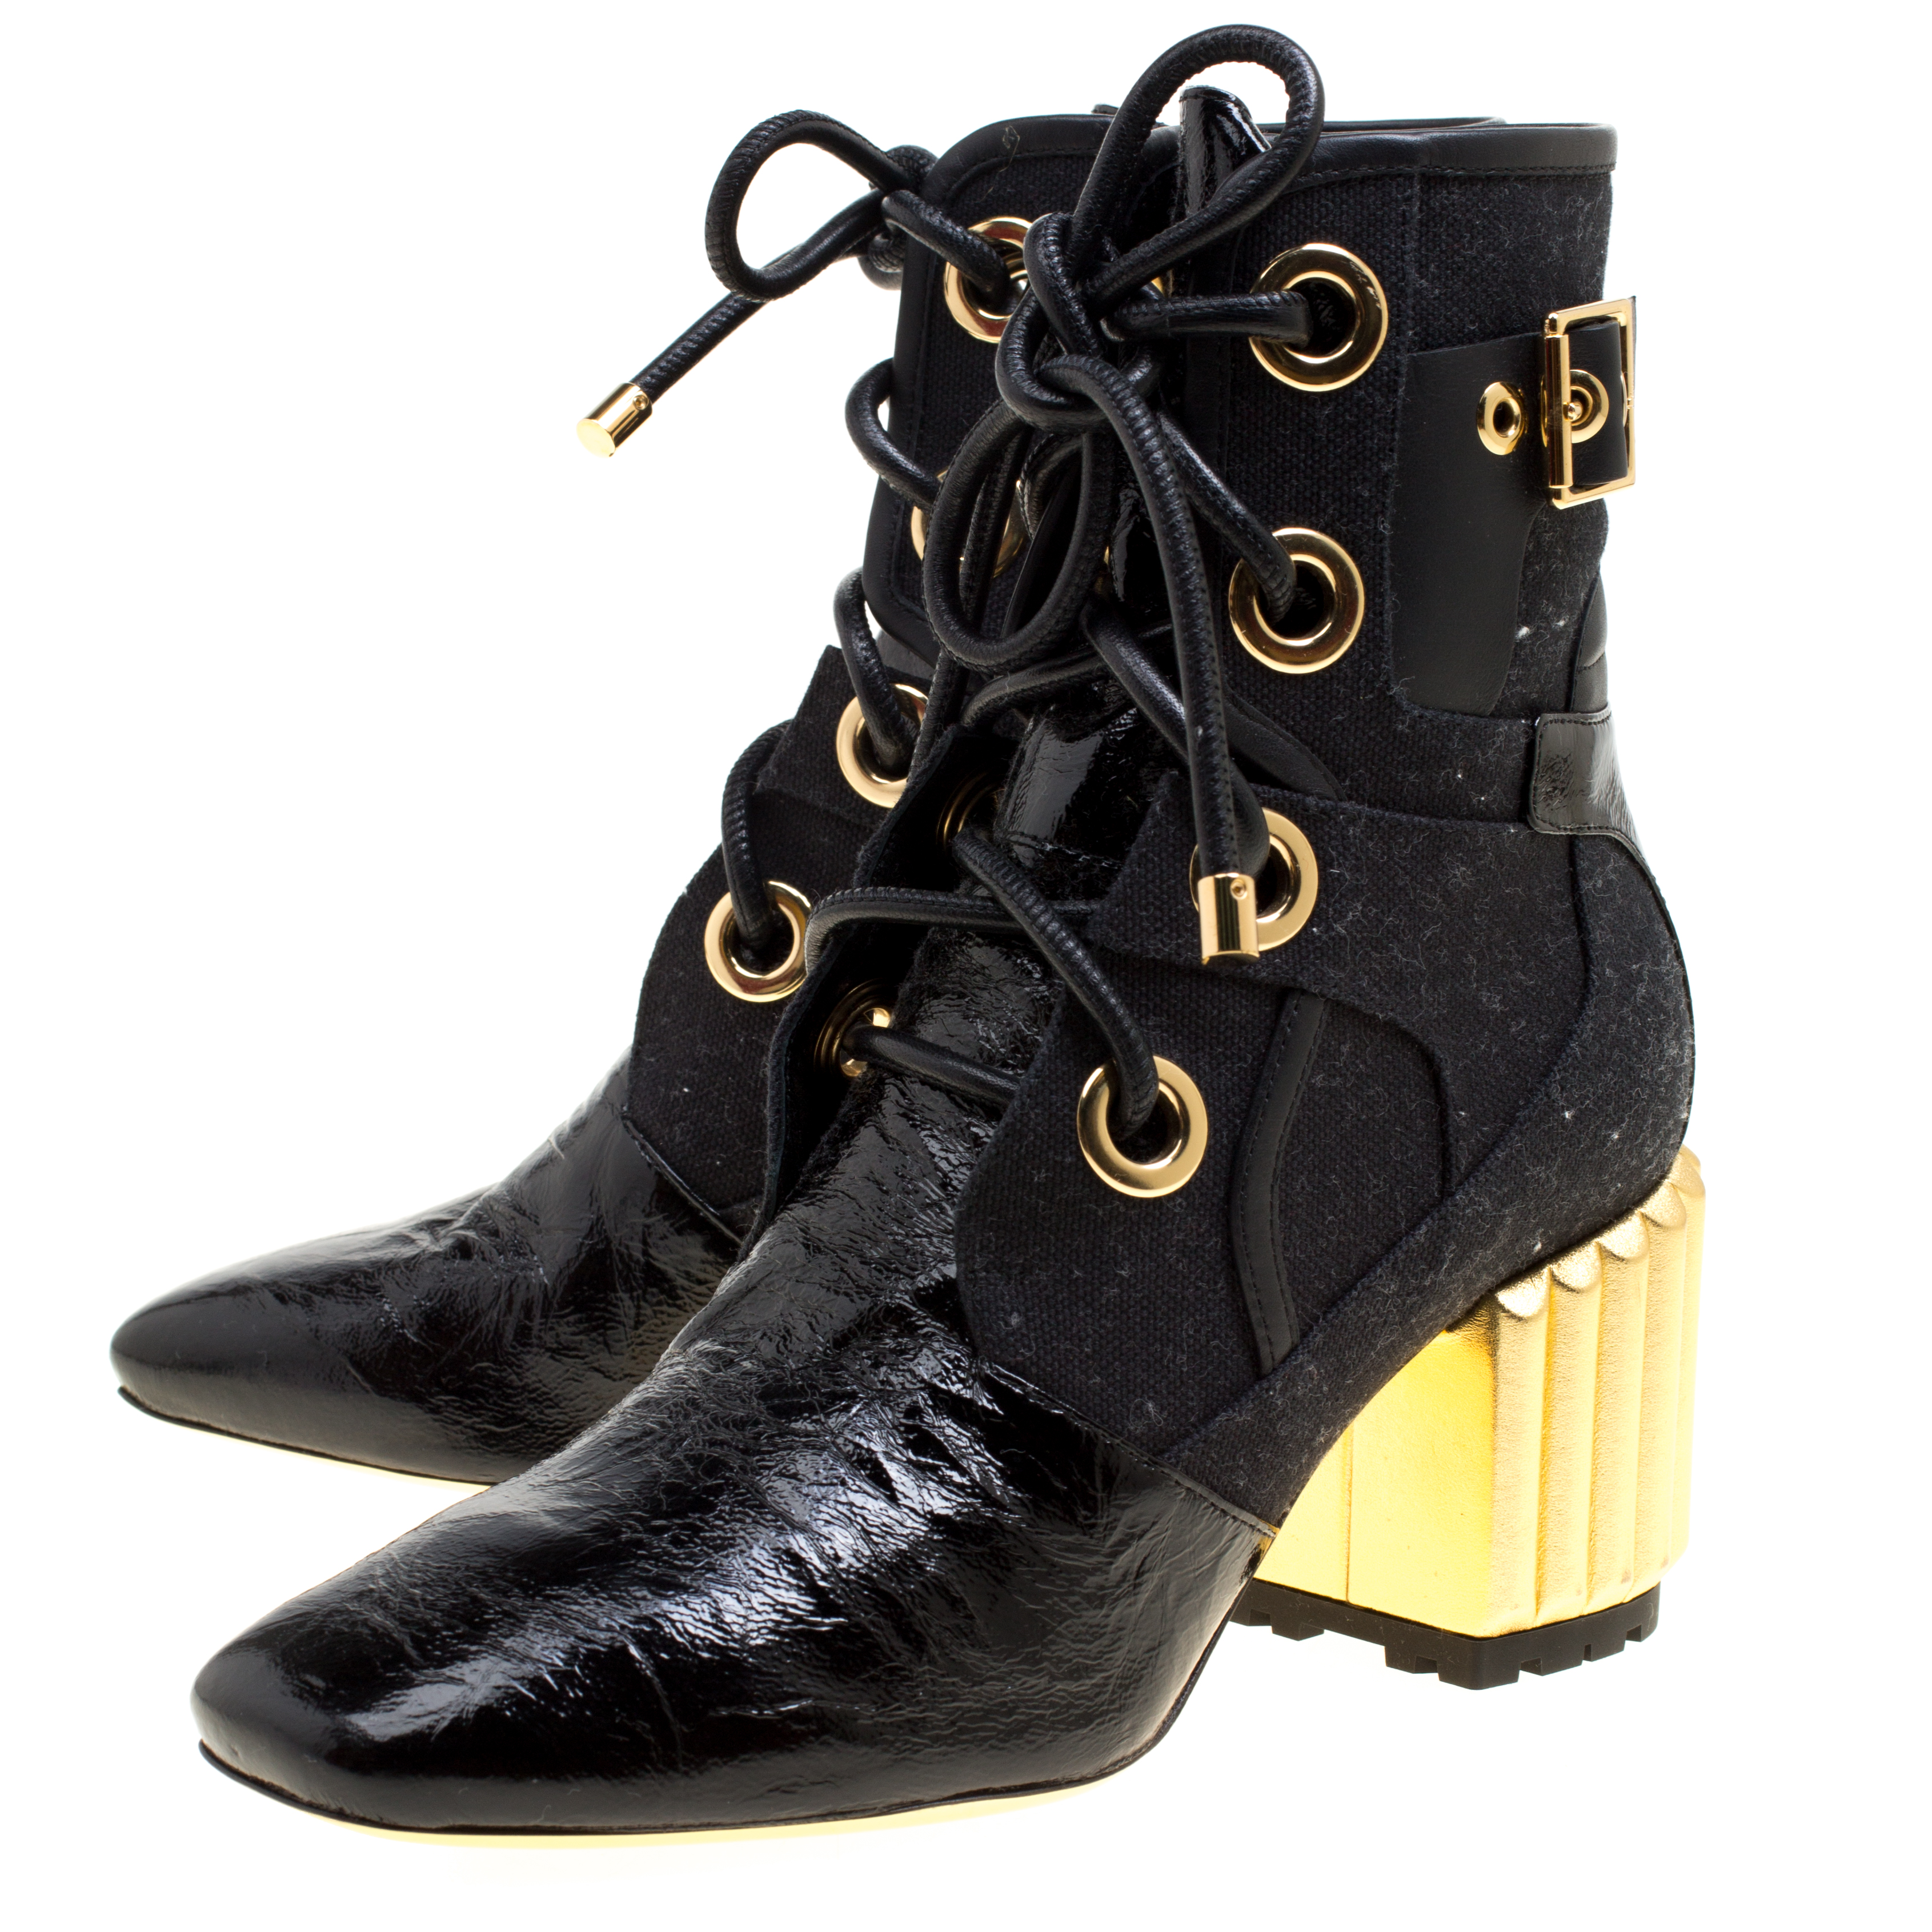 Dior, Glorious Black leather ankle boot